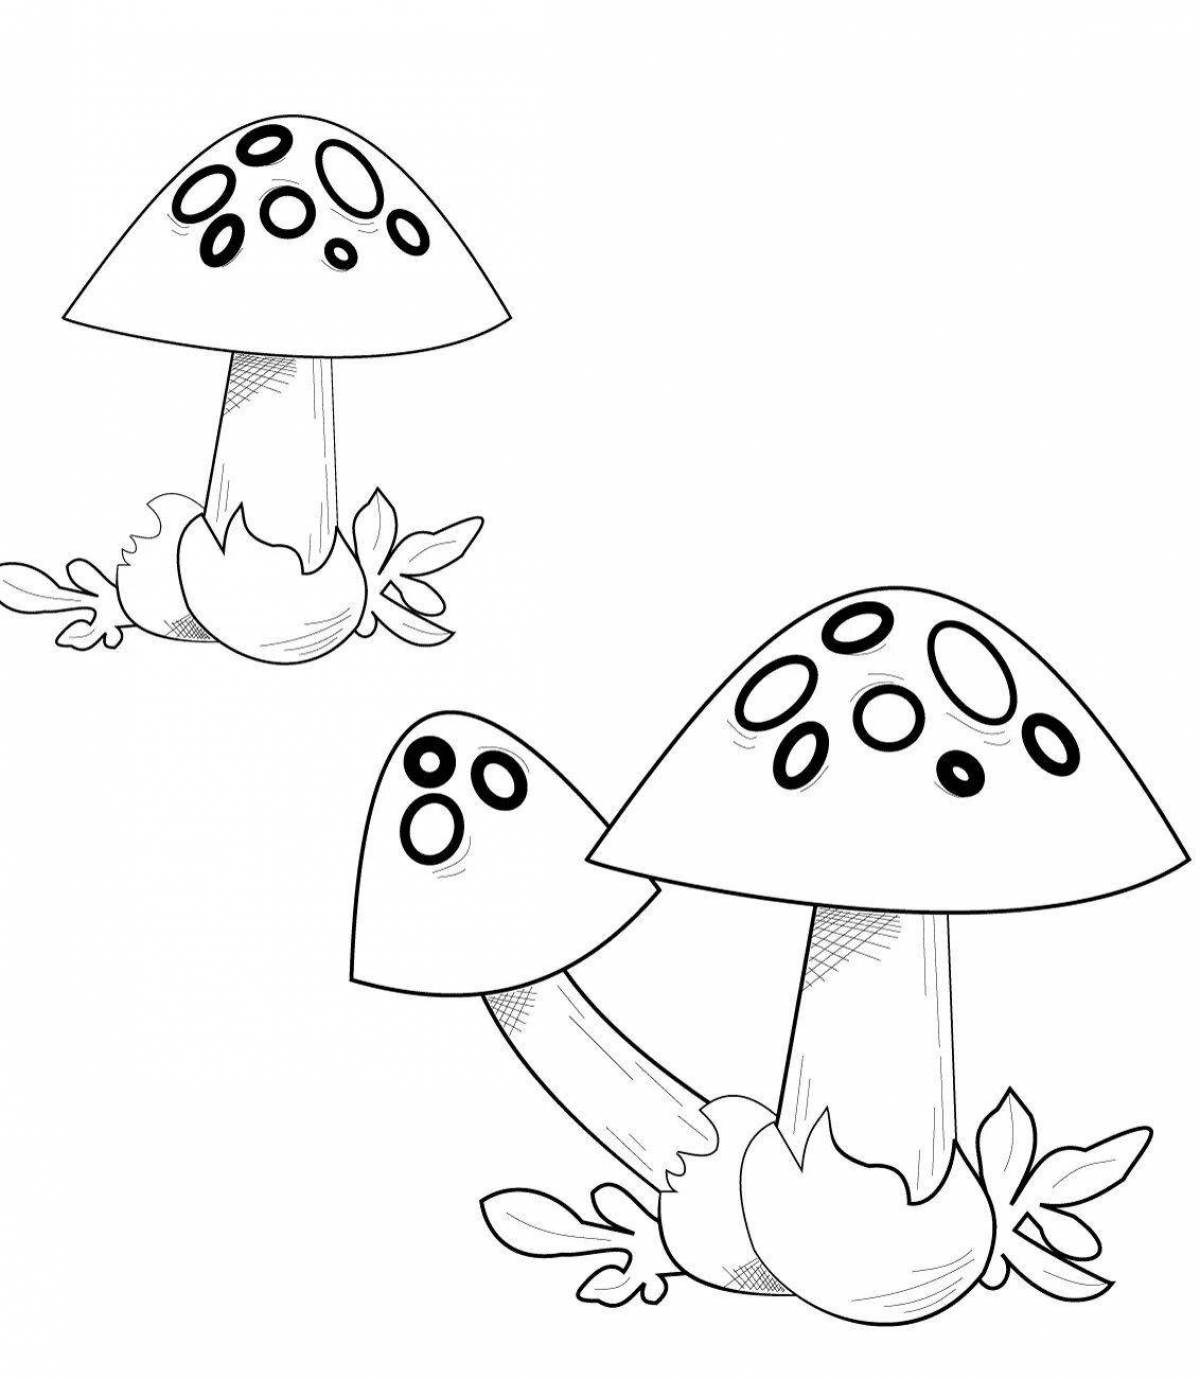 Fine red fly agaric coloring page